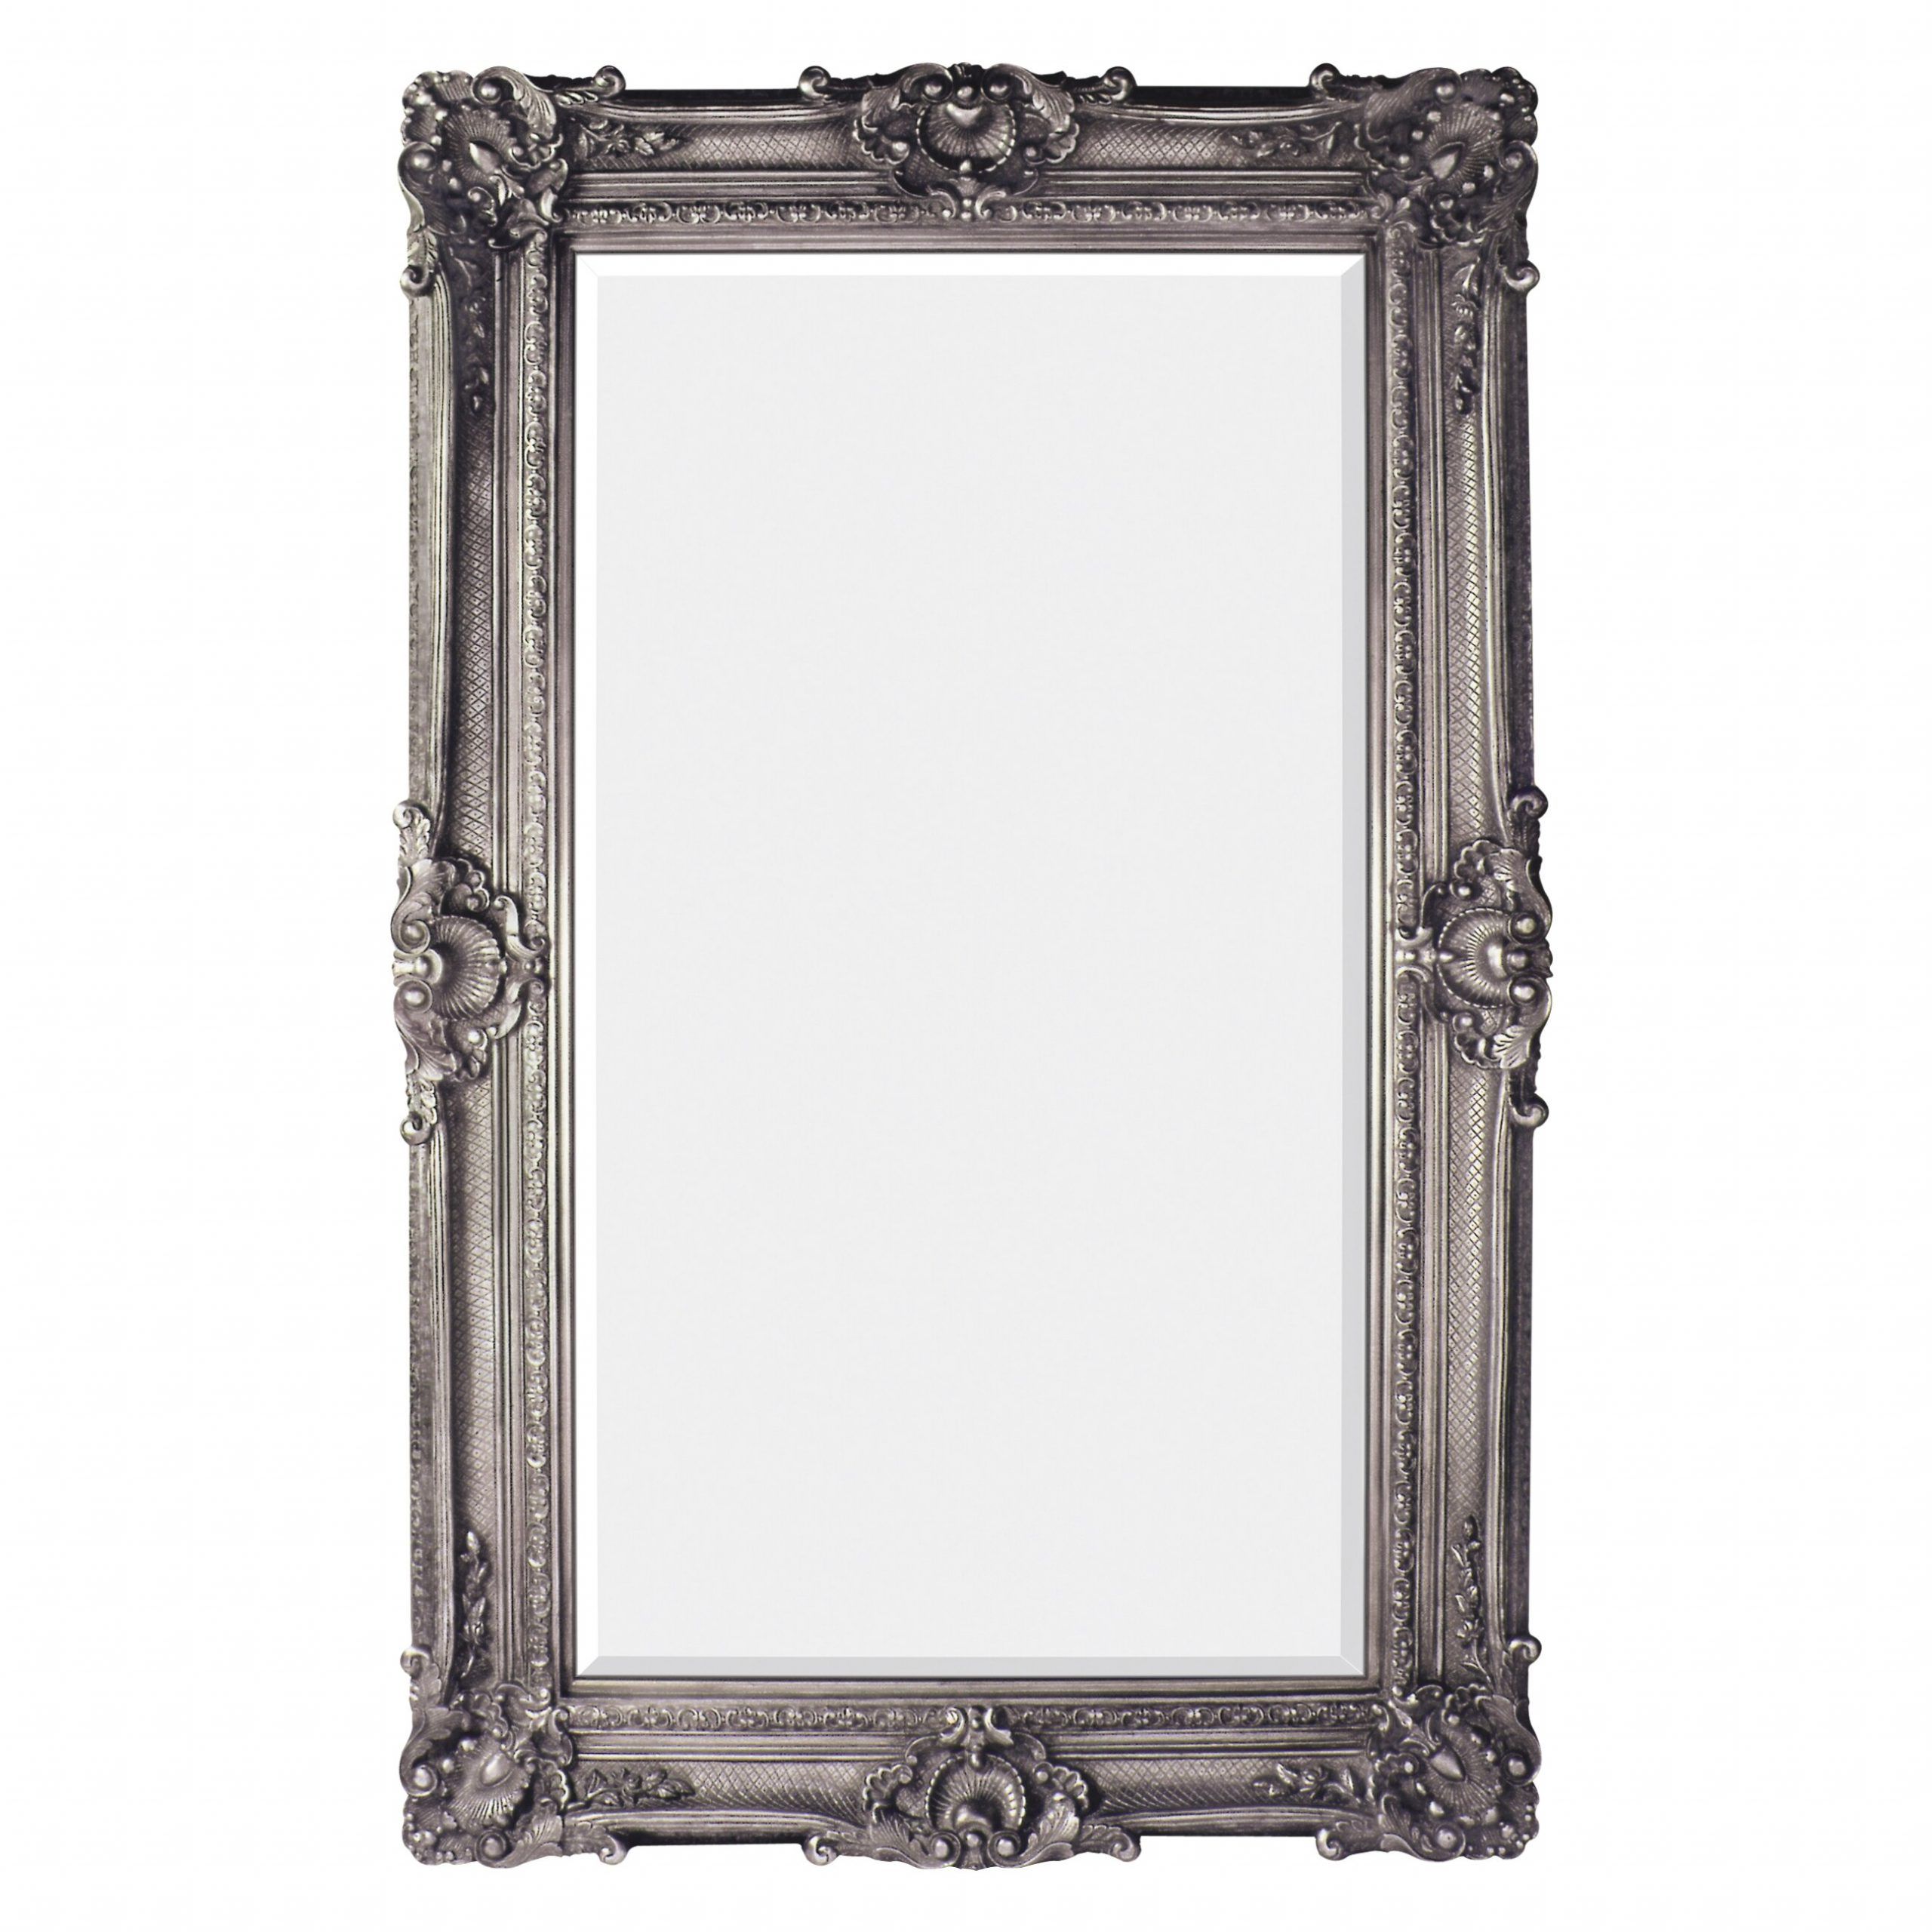 Majestic Mirror Antique Silver Leaf Finish Traditional Framed Beveled Pertaining To Metallic Gold Leaf Wall Mirrors (View 7 of 15)